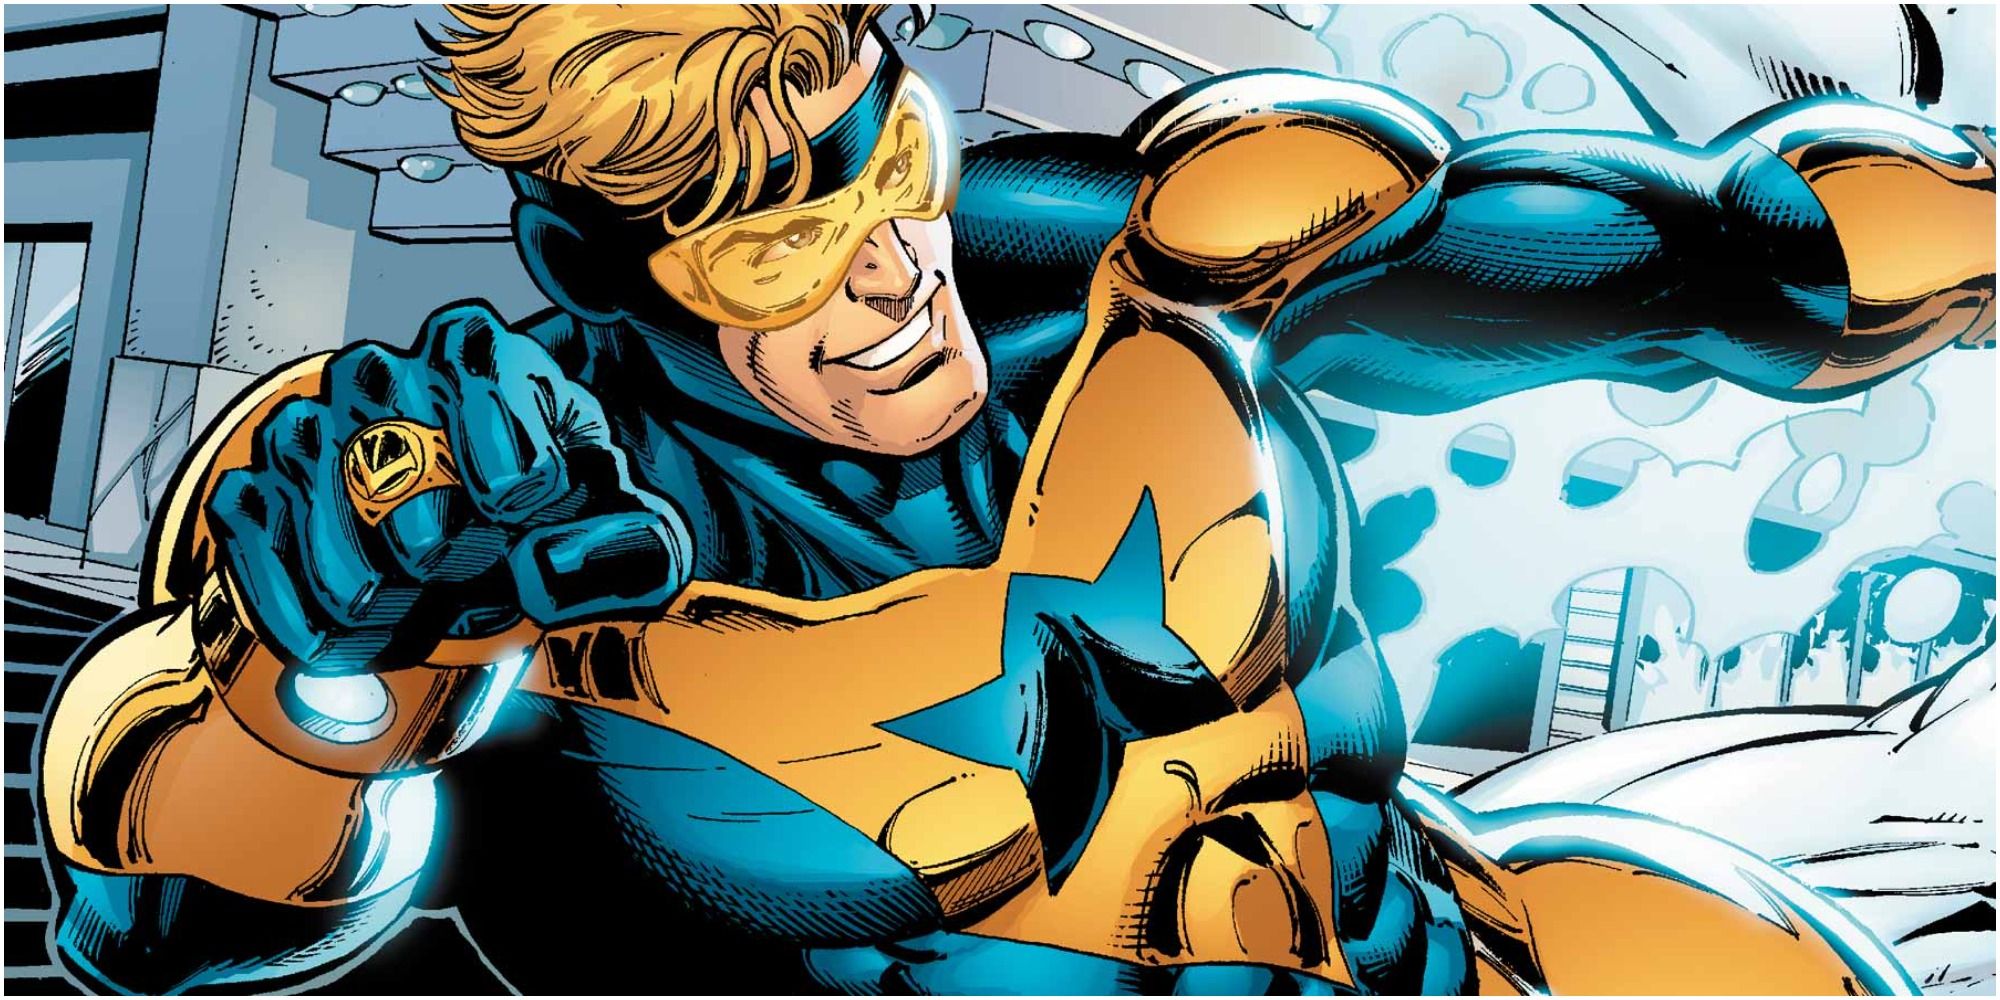 DC Comics' Booster Gold posing mid-fight.